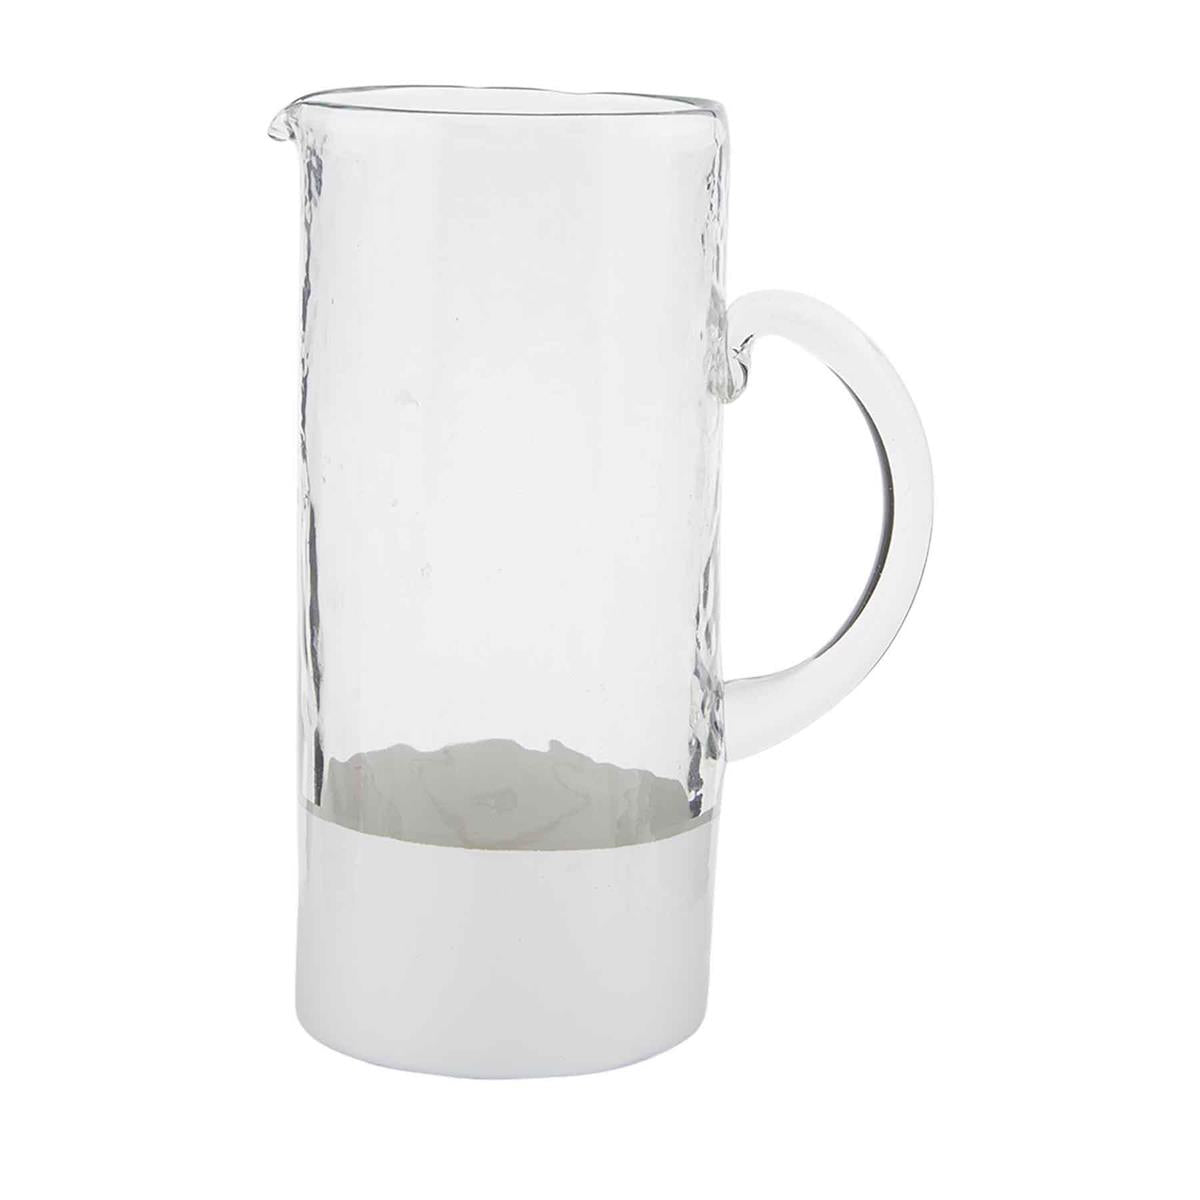 Two-Tone Glass Pitcher